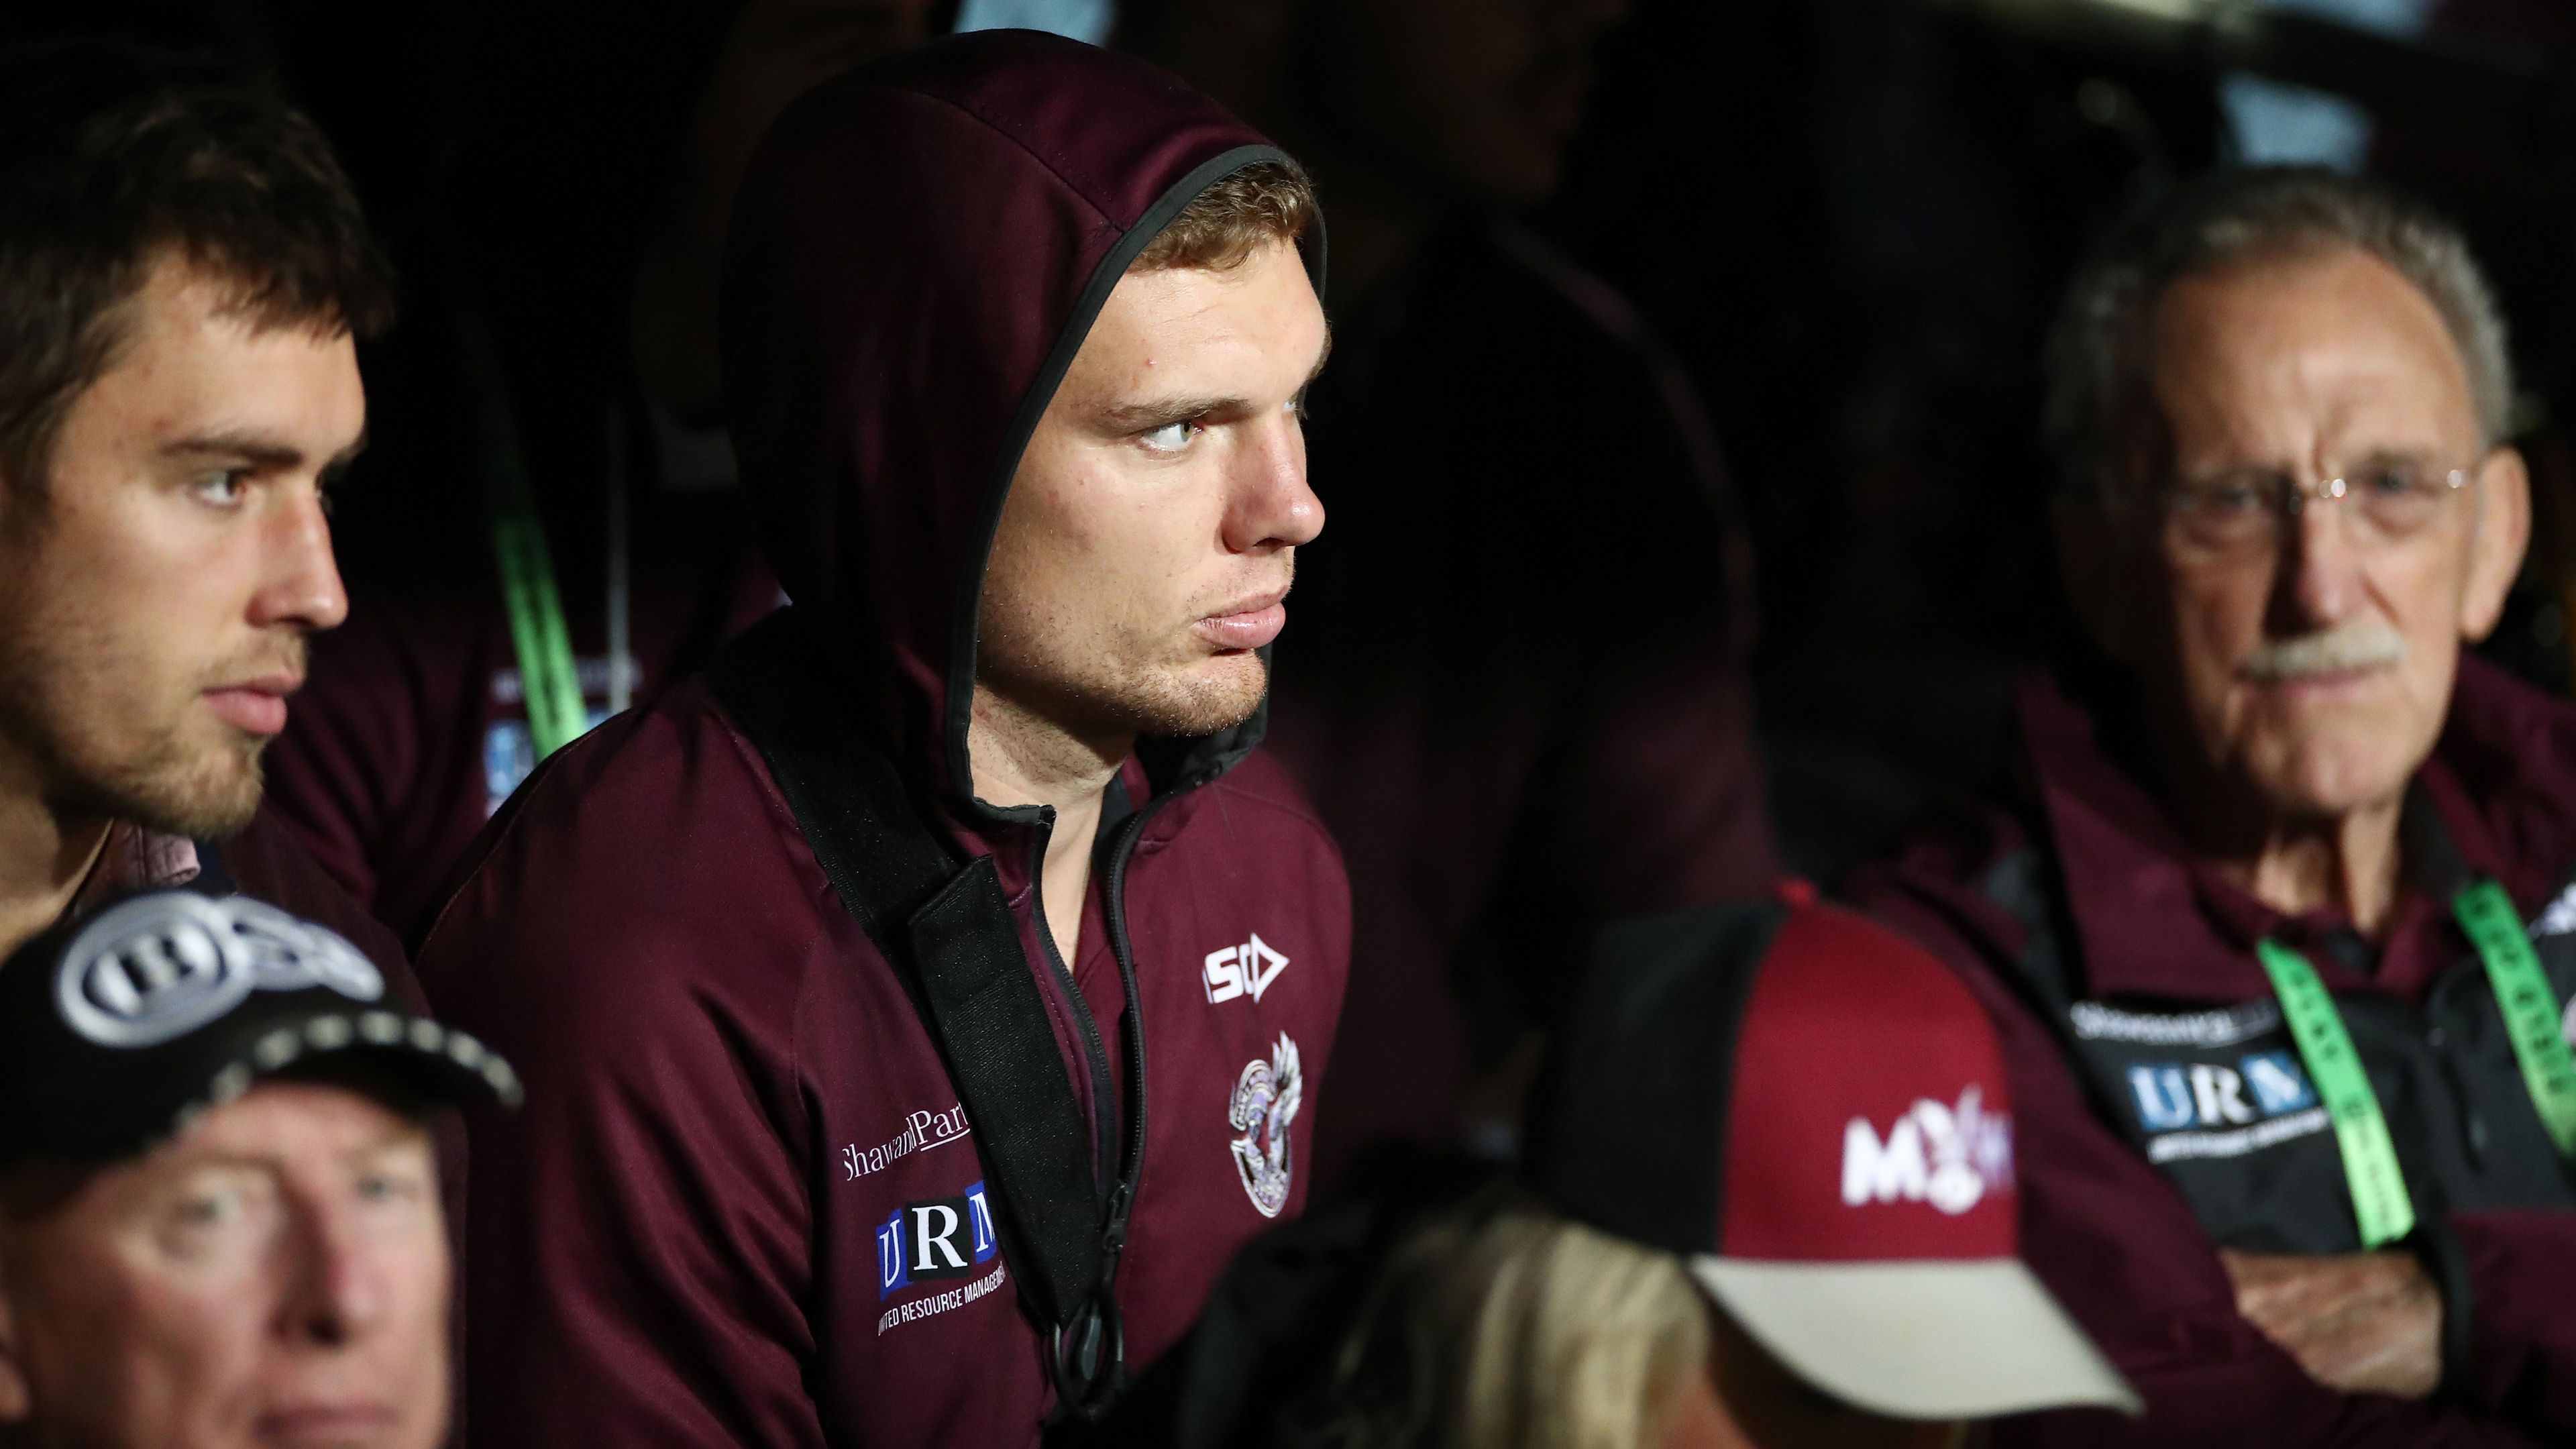 Manly star Tom Trbojevic to have surgery this week, out for 2019 season